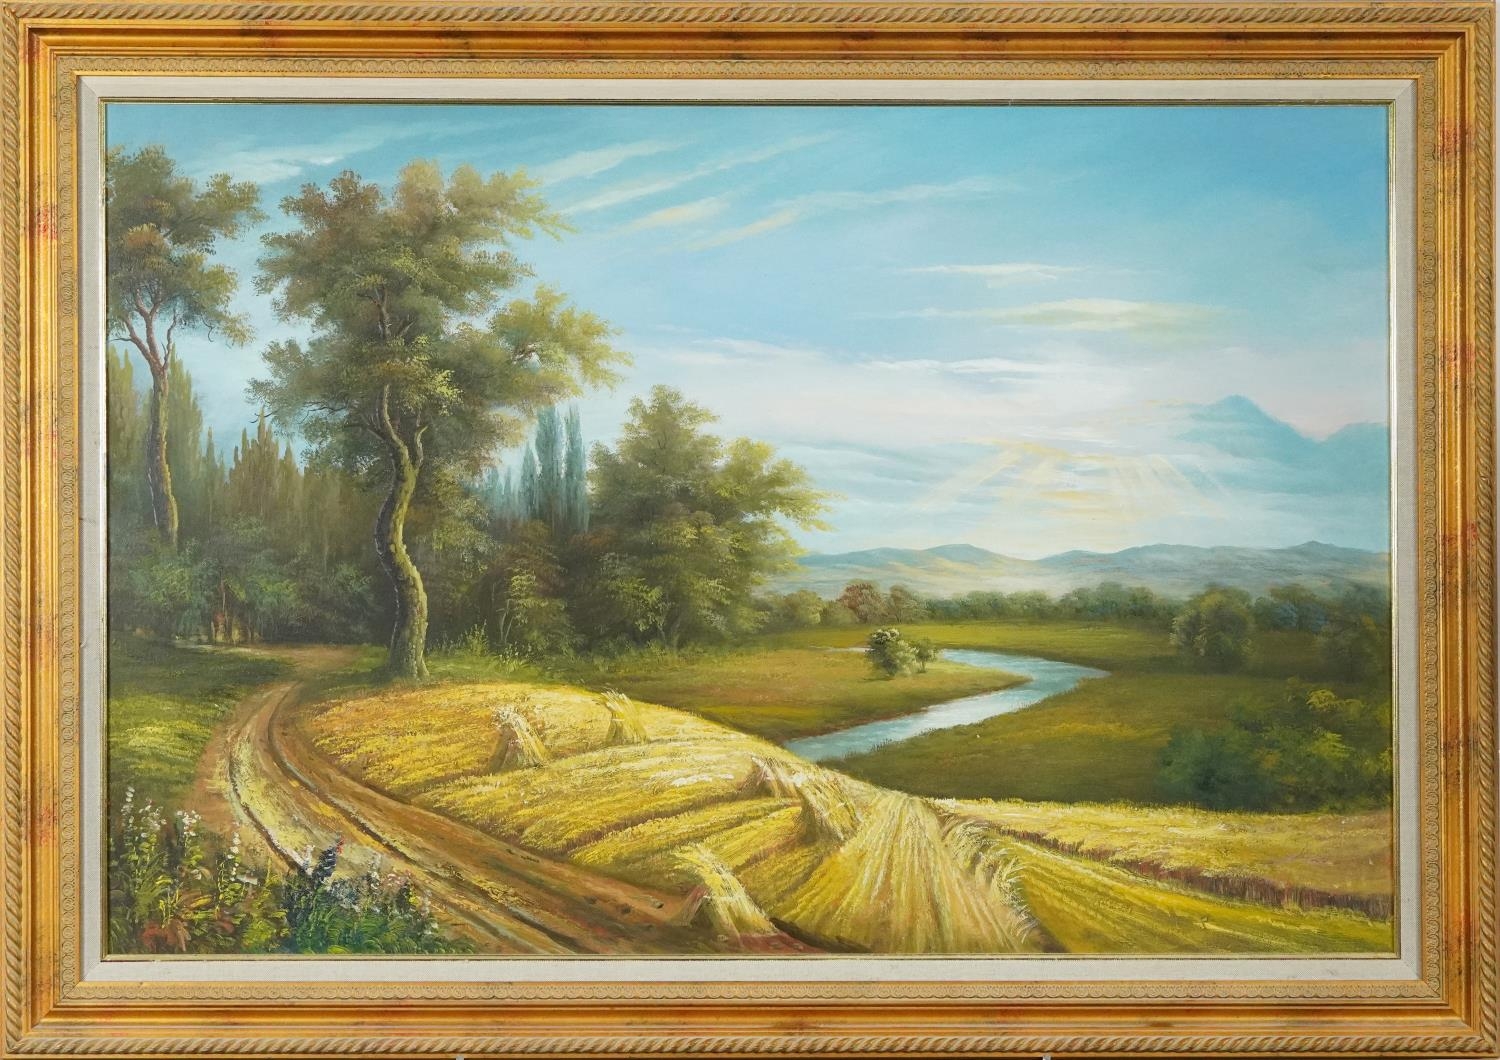 Rural landscape, contemporary oil on canvas, mounted and framed, 90cm x 60cm excluding the mount and - Image 2 of 3